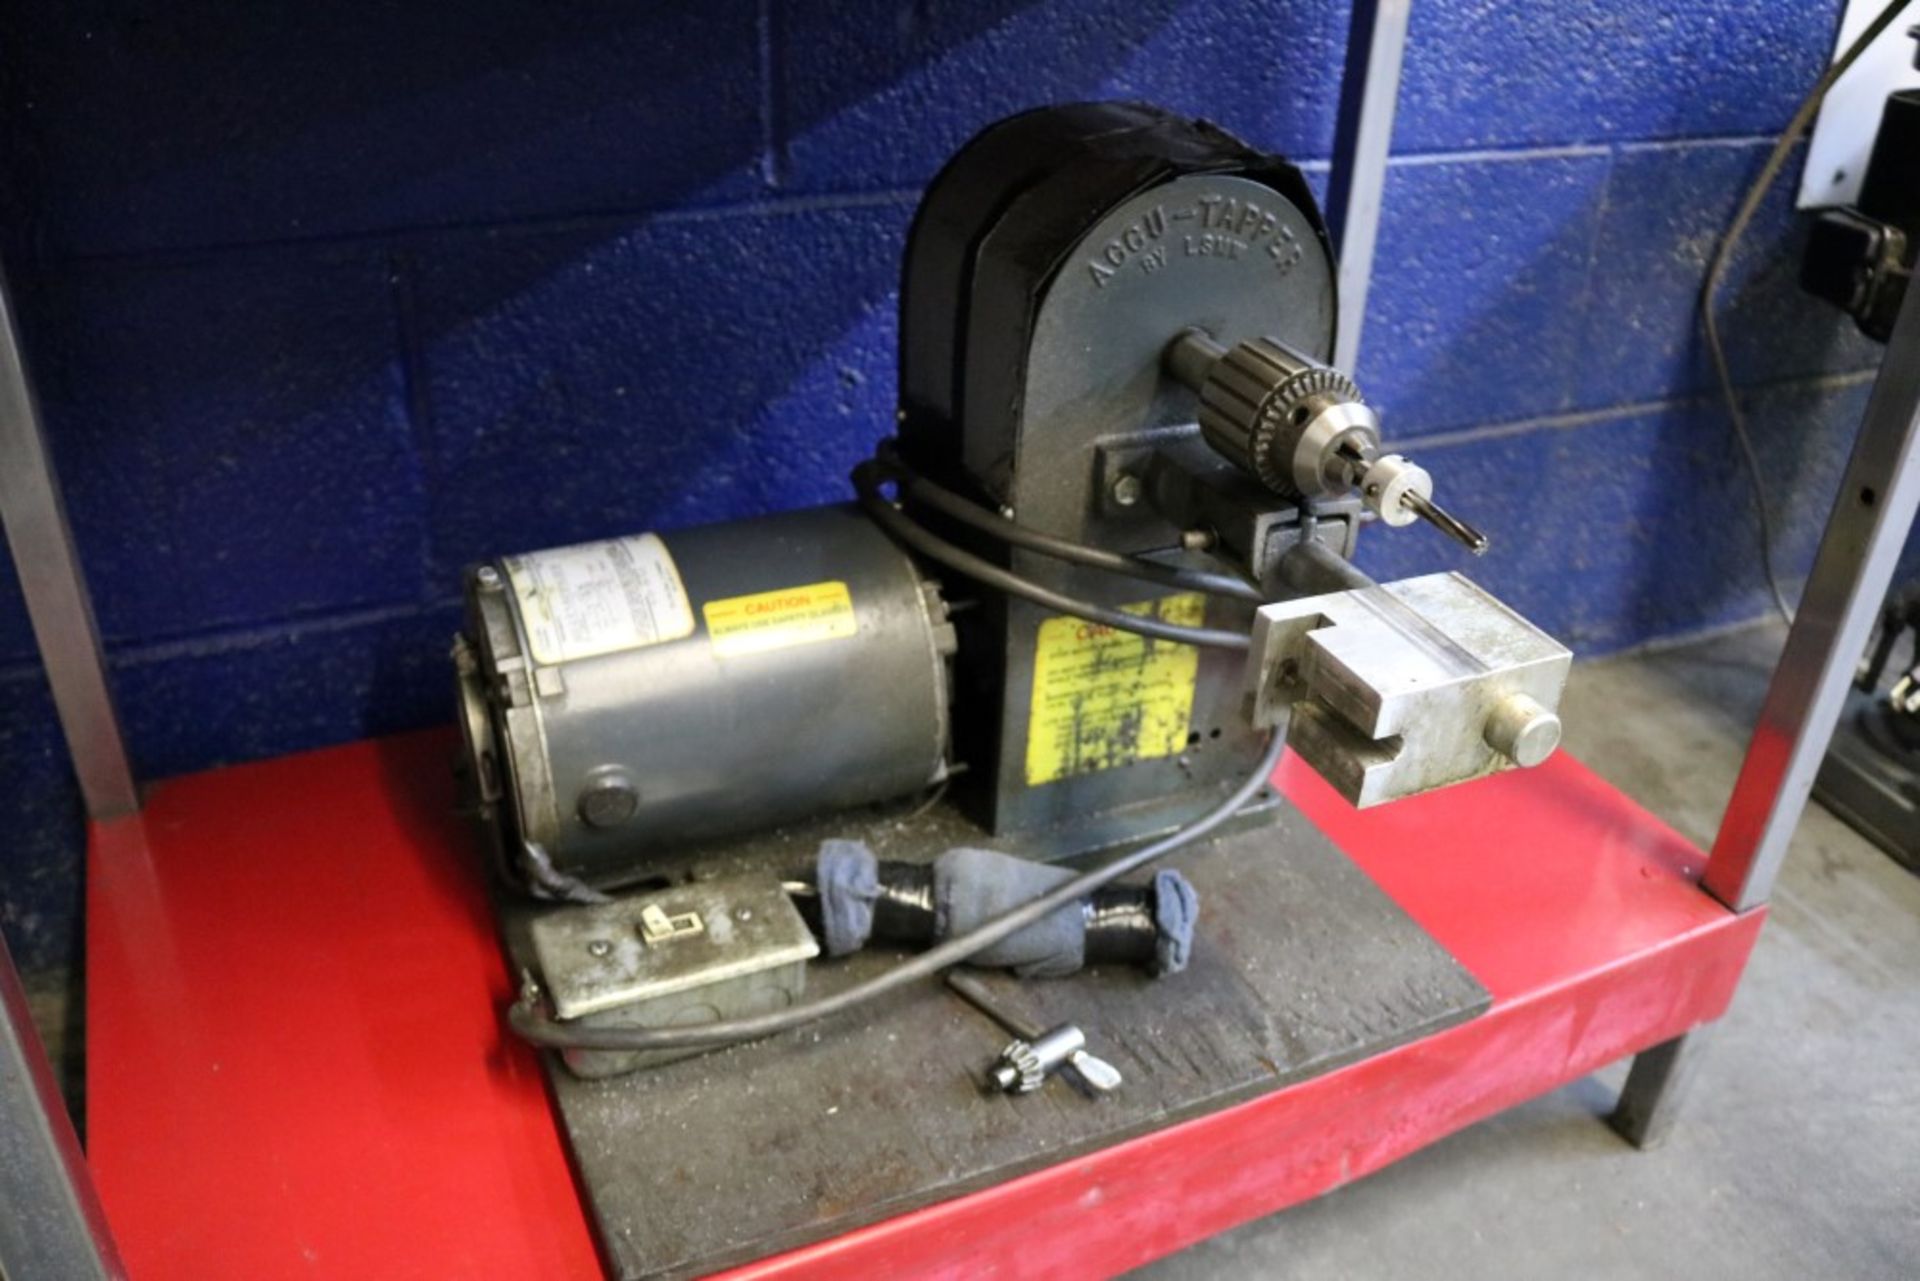 13mm Drill Press Model RDM-1301B, 5 Speed, 1/4 HP and Accu-Tapper By LSMW with Jacob Chuck - Image 6 of 9